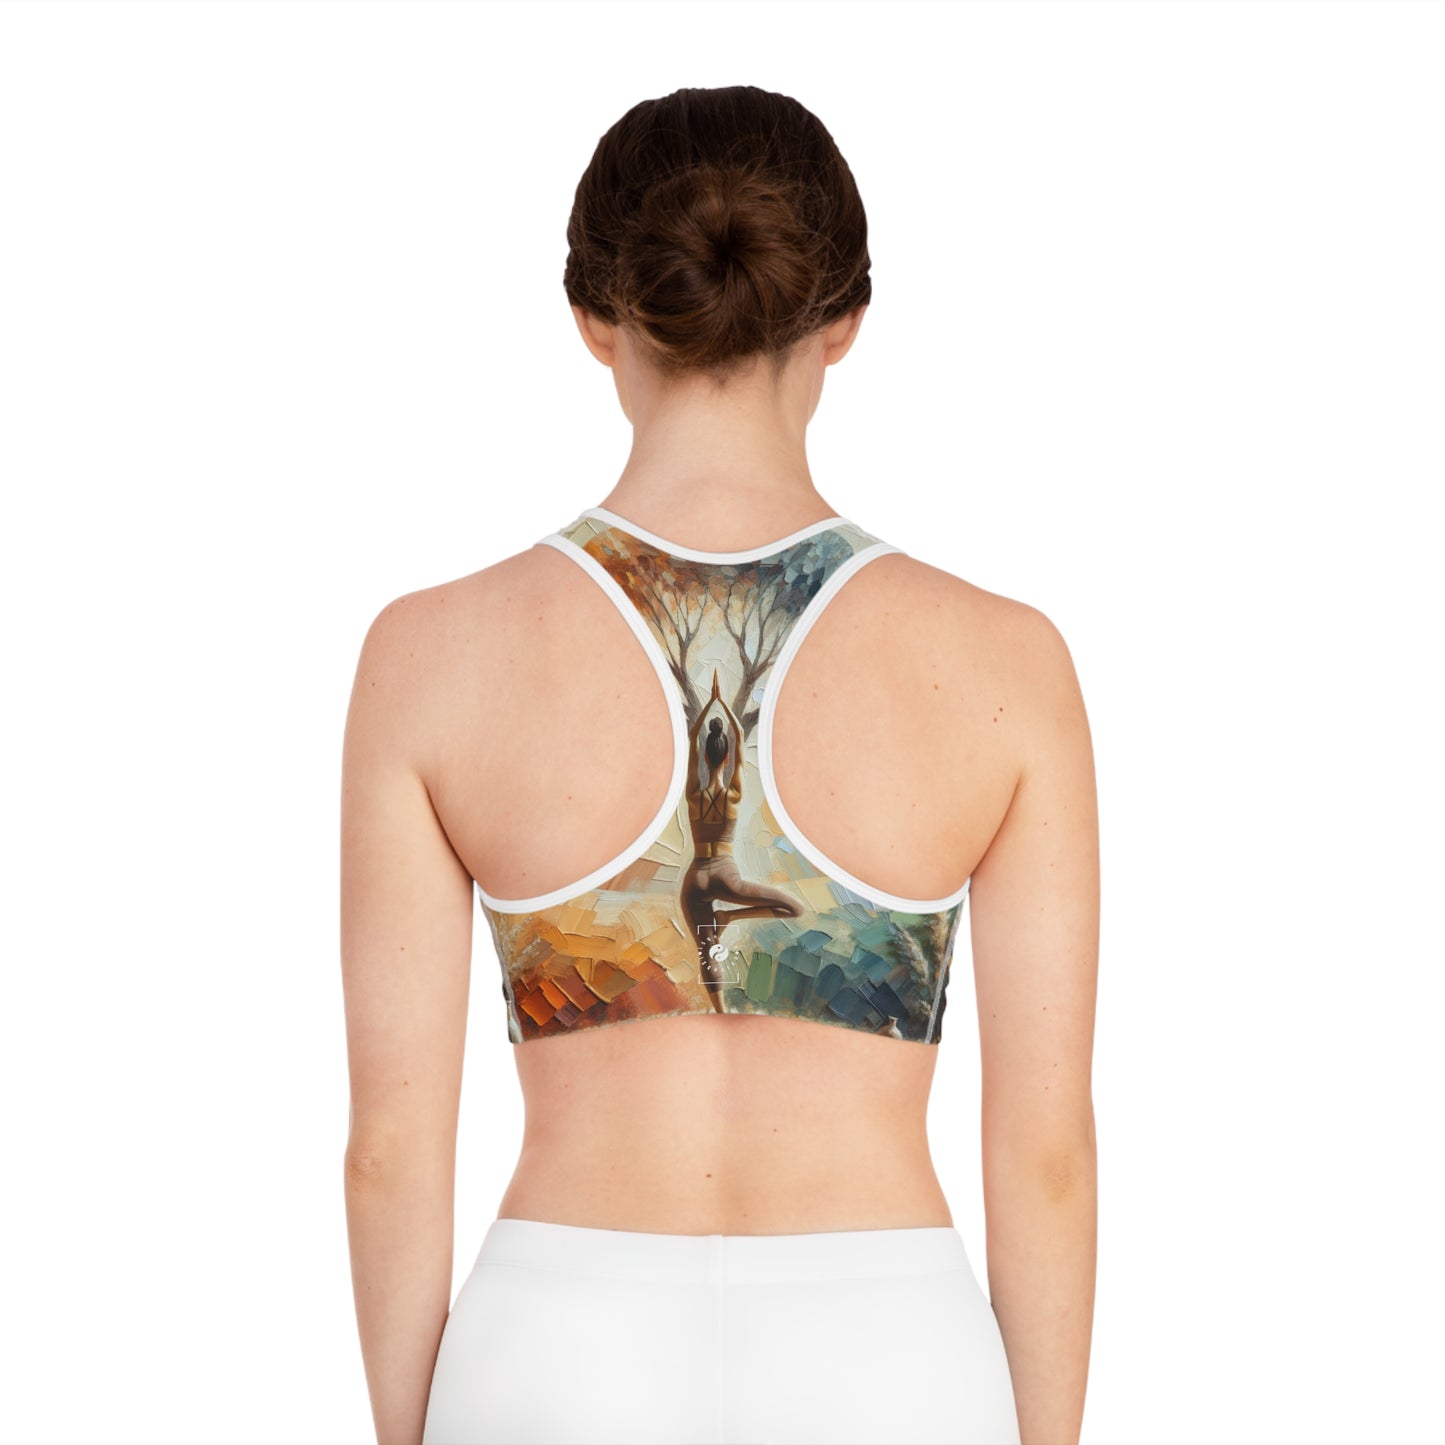 "Stability in Surrender: Vrikshasana in Harmony with Earth" - High Performance Sports Bra